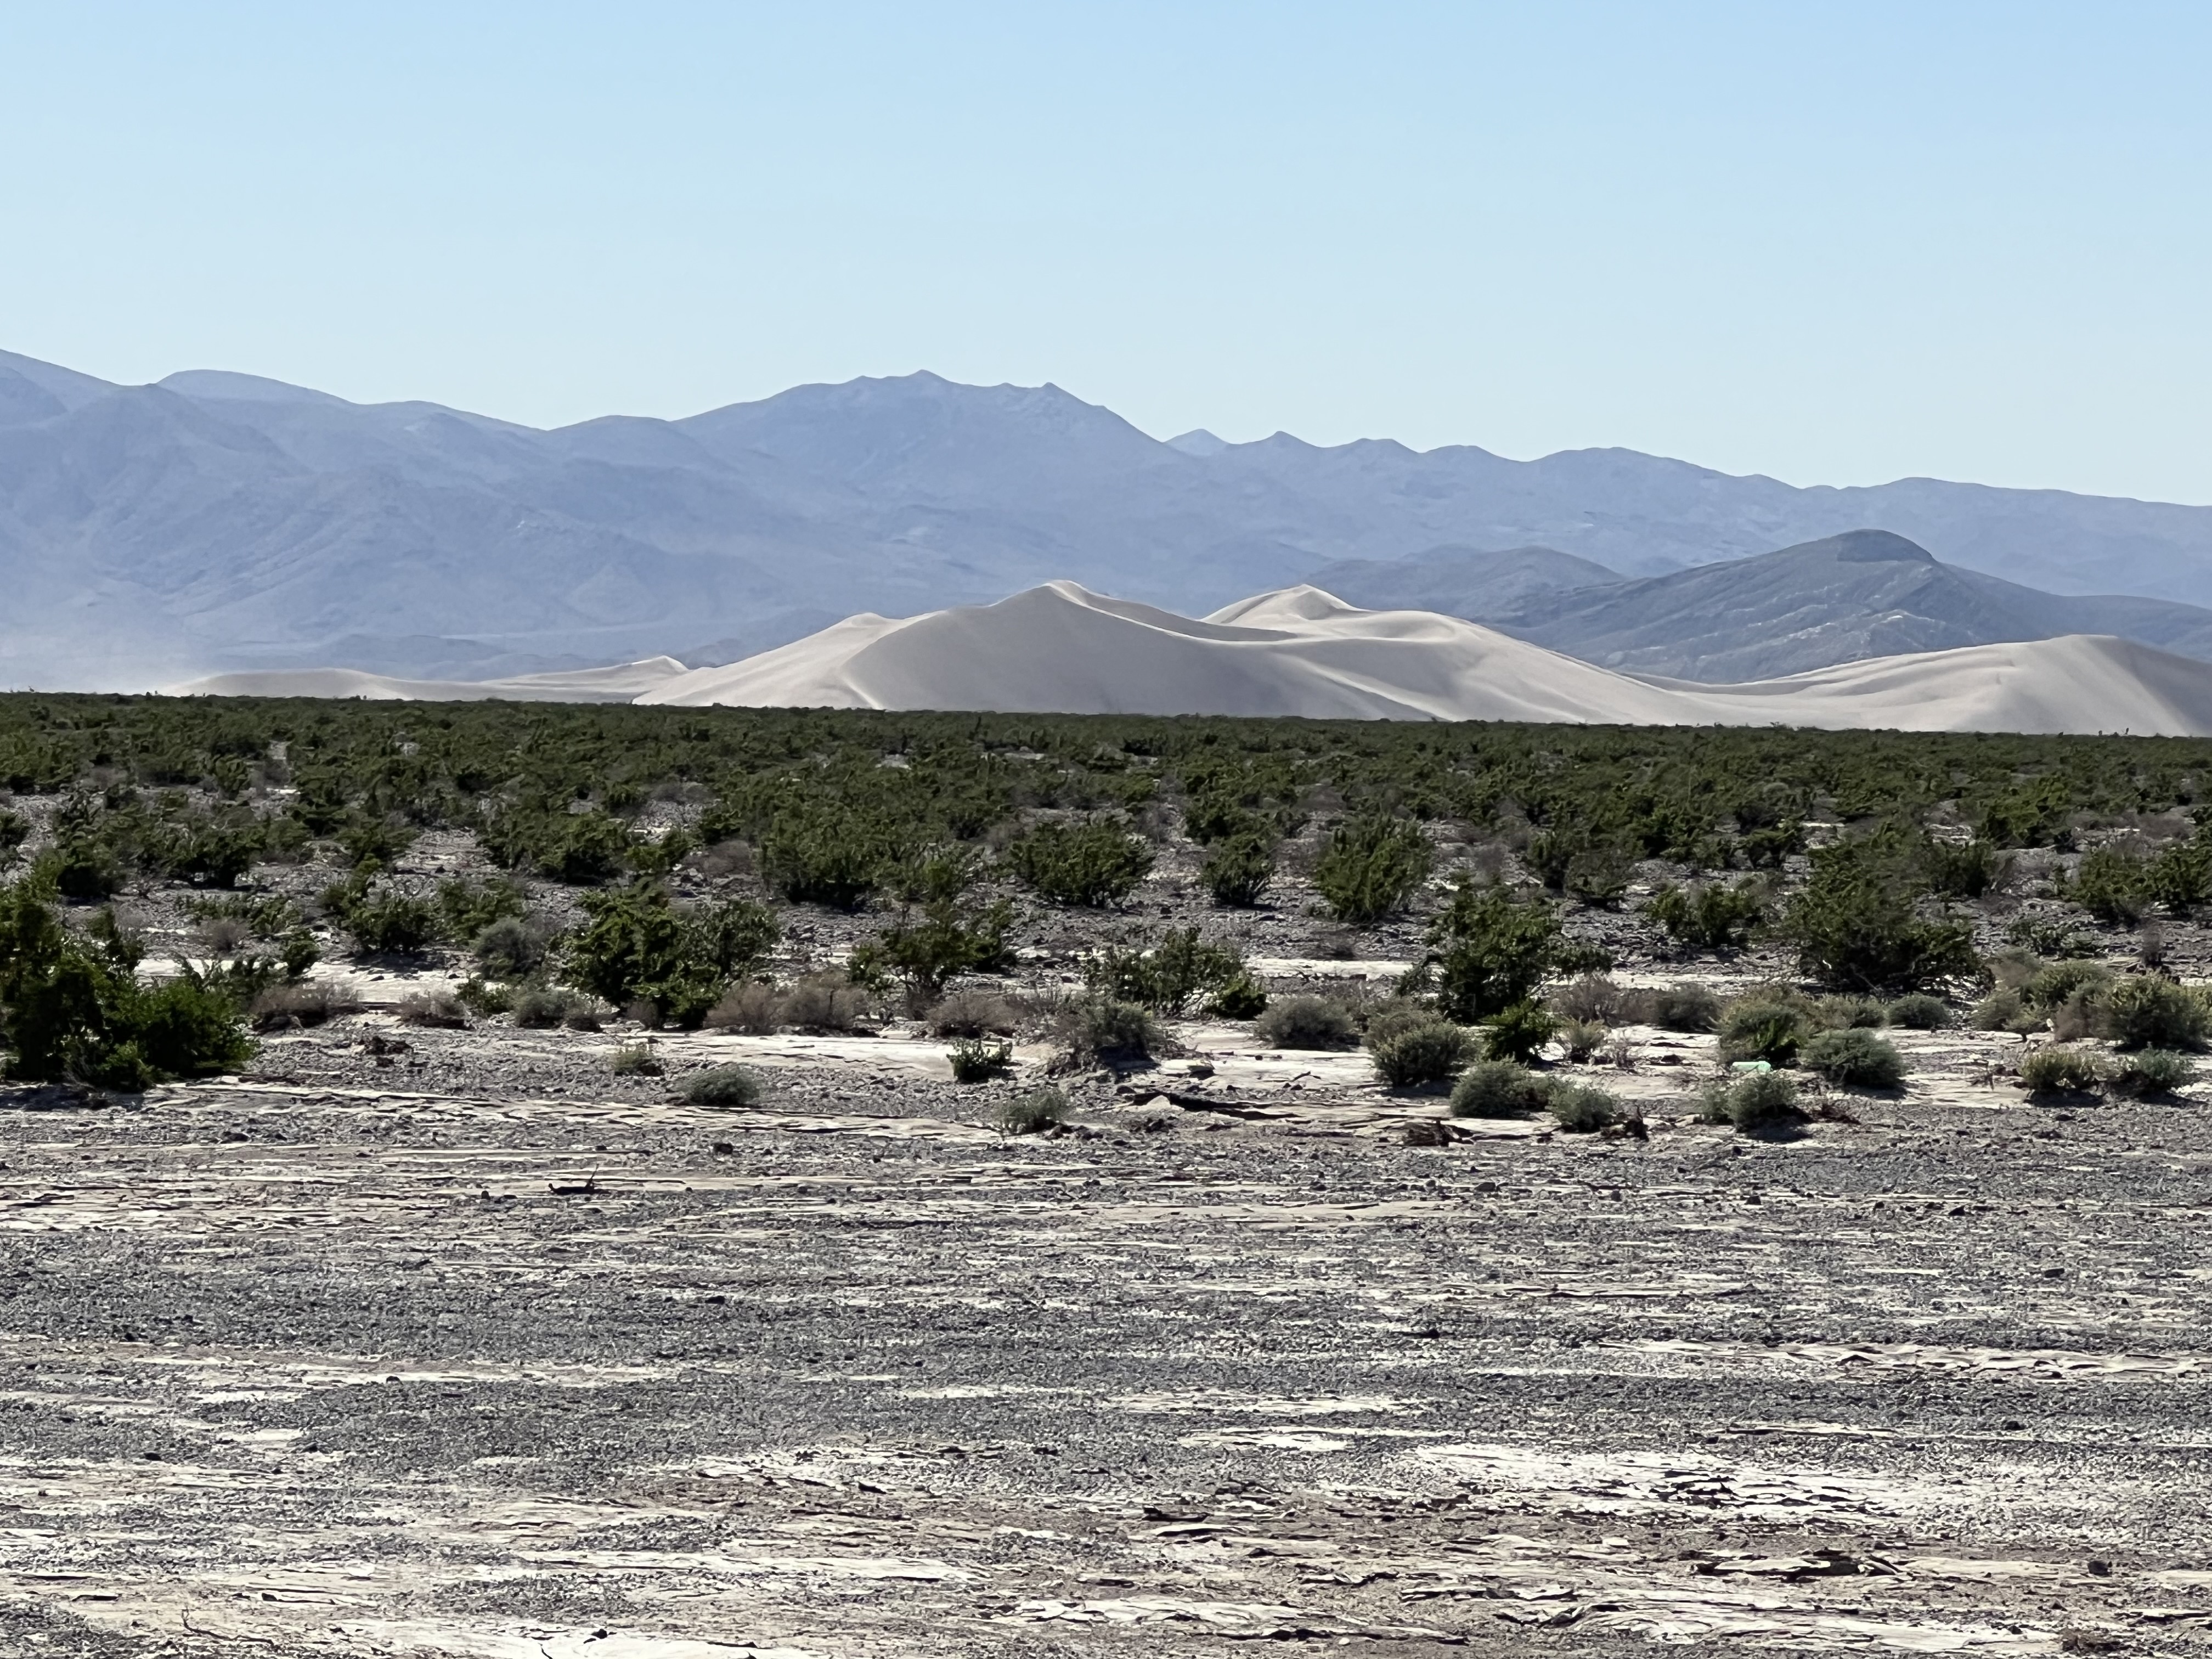 Desert land, covered in plants, with mountains in the background.